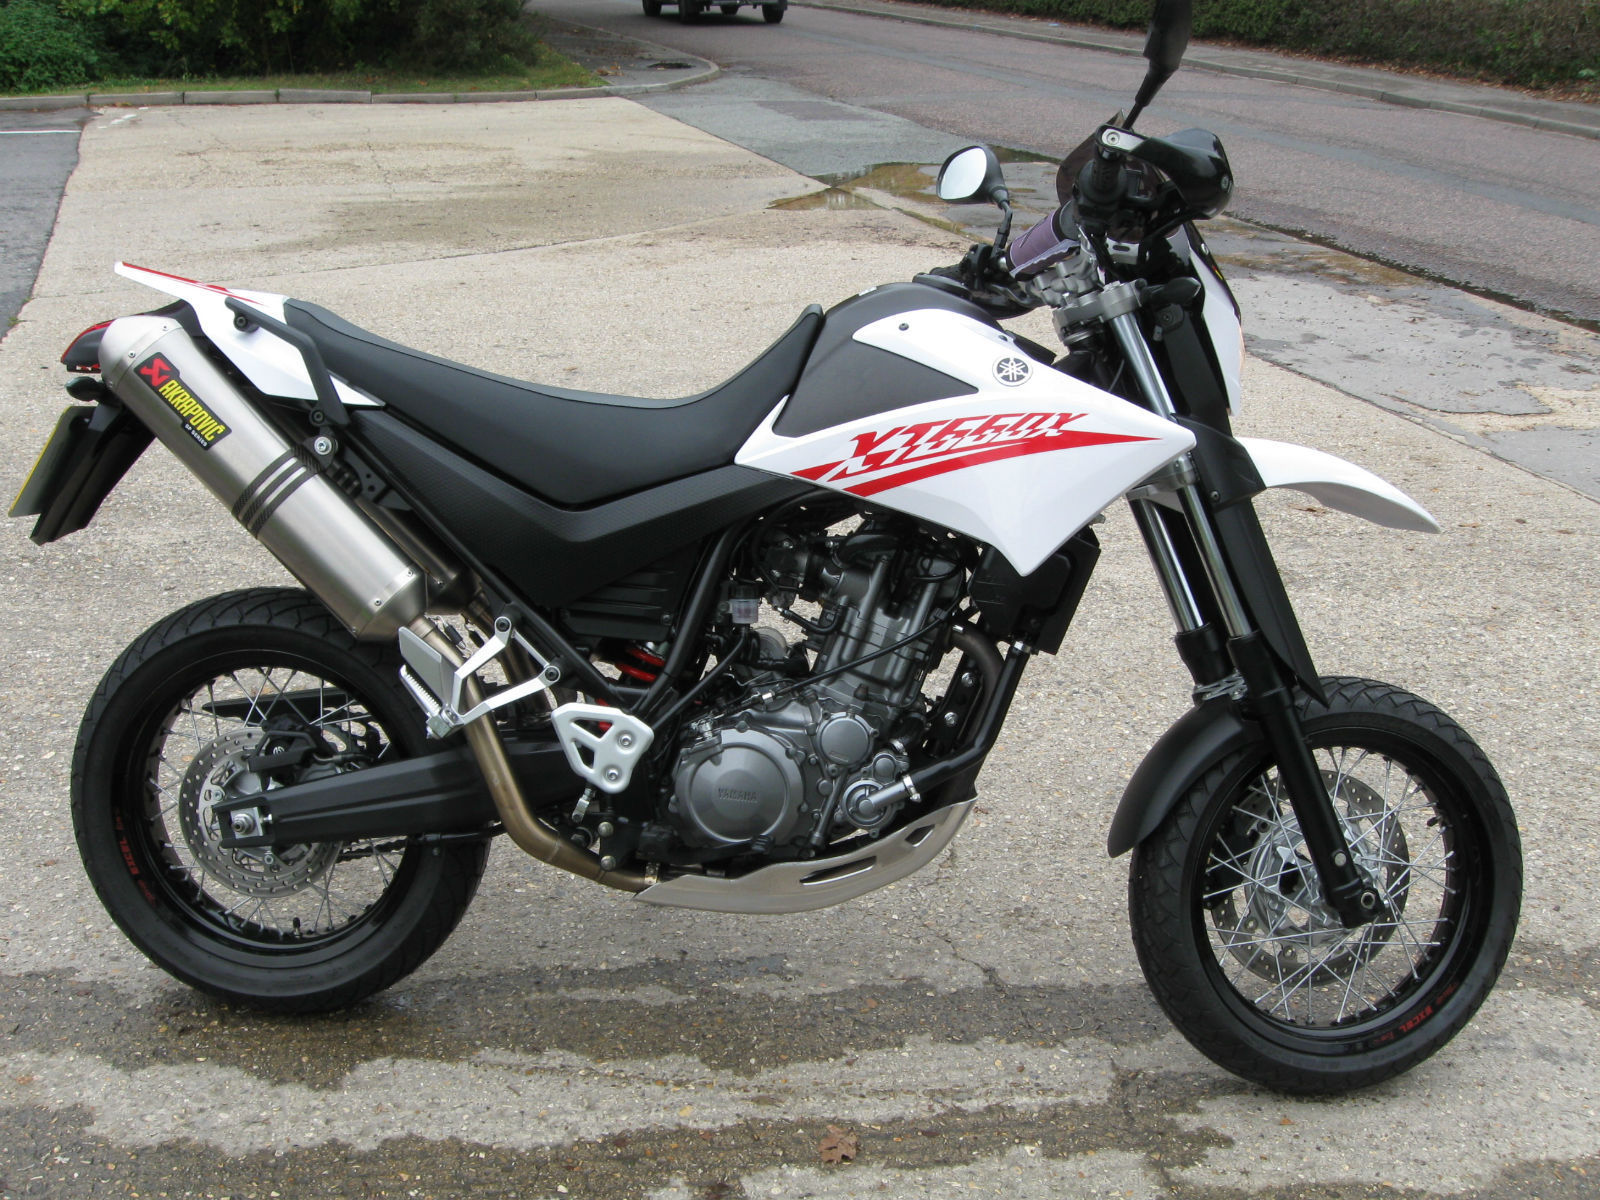 yamaha-xt-660-x-white-2-owner-4268-mile-akrapovic-exhaust-very-clean